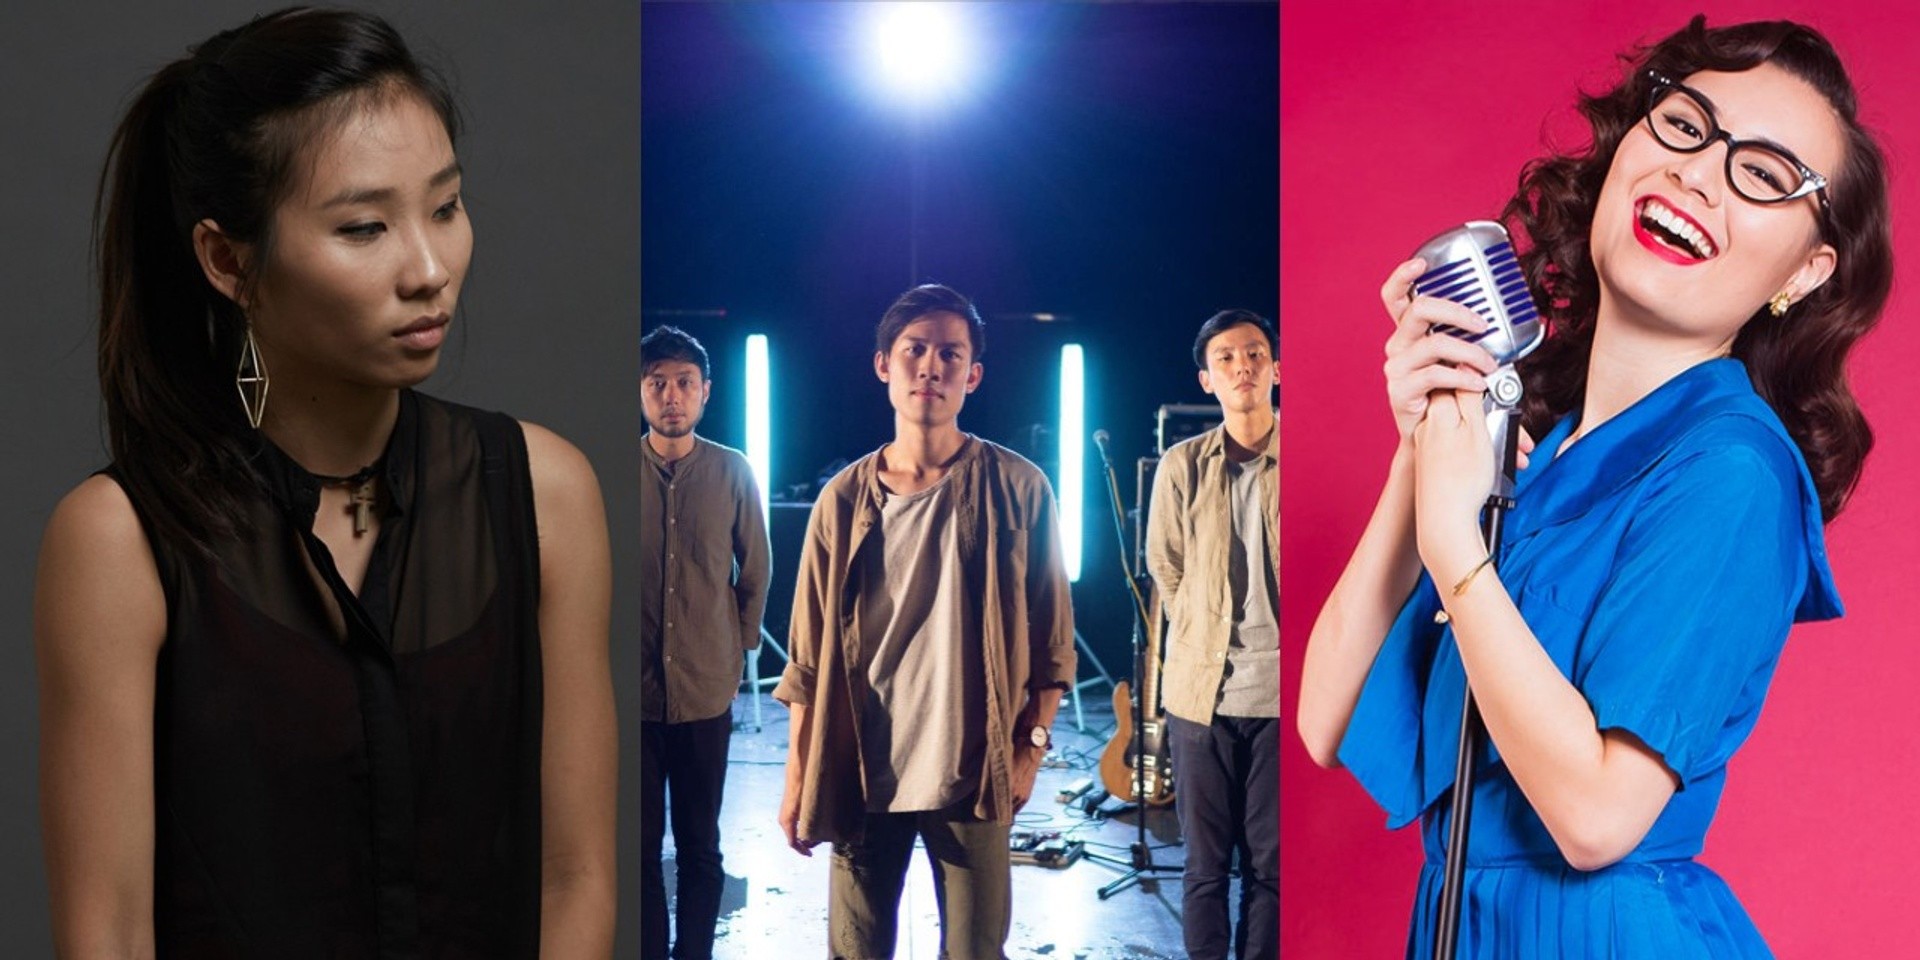 Here's the complete music lineup for the Singapore Night Festival